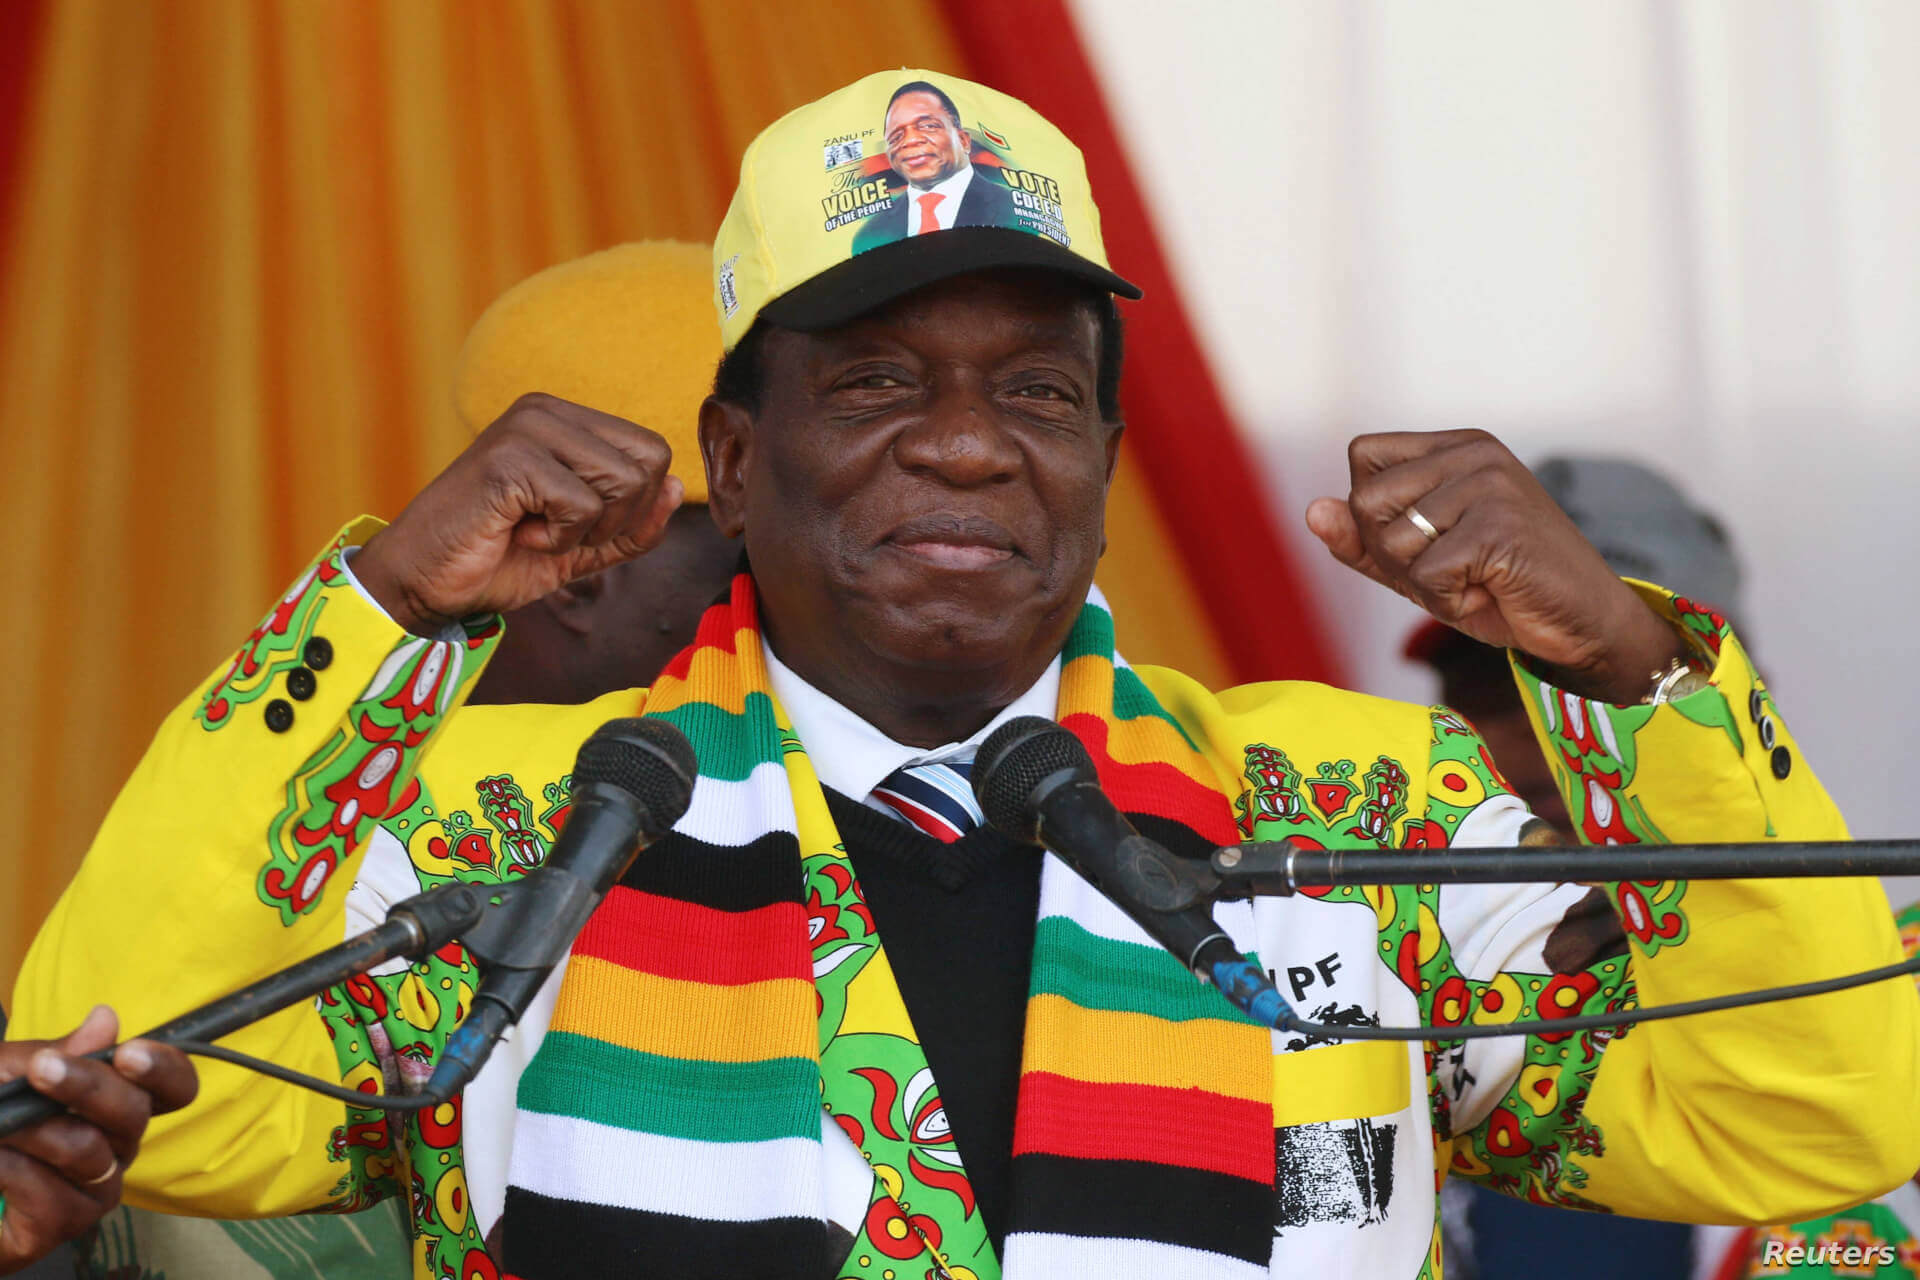 Zimbabwean Government Issues Scathing Attack on Catholic Bishops For Public Criticism